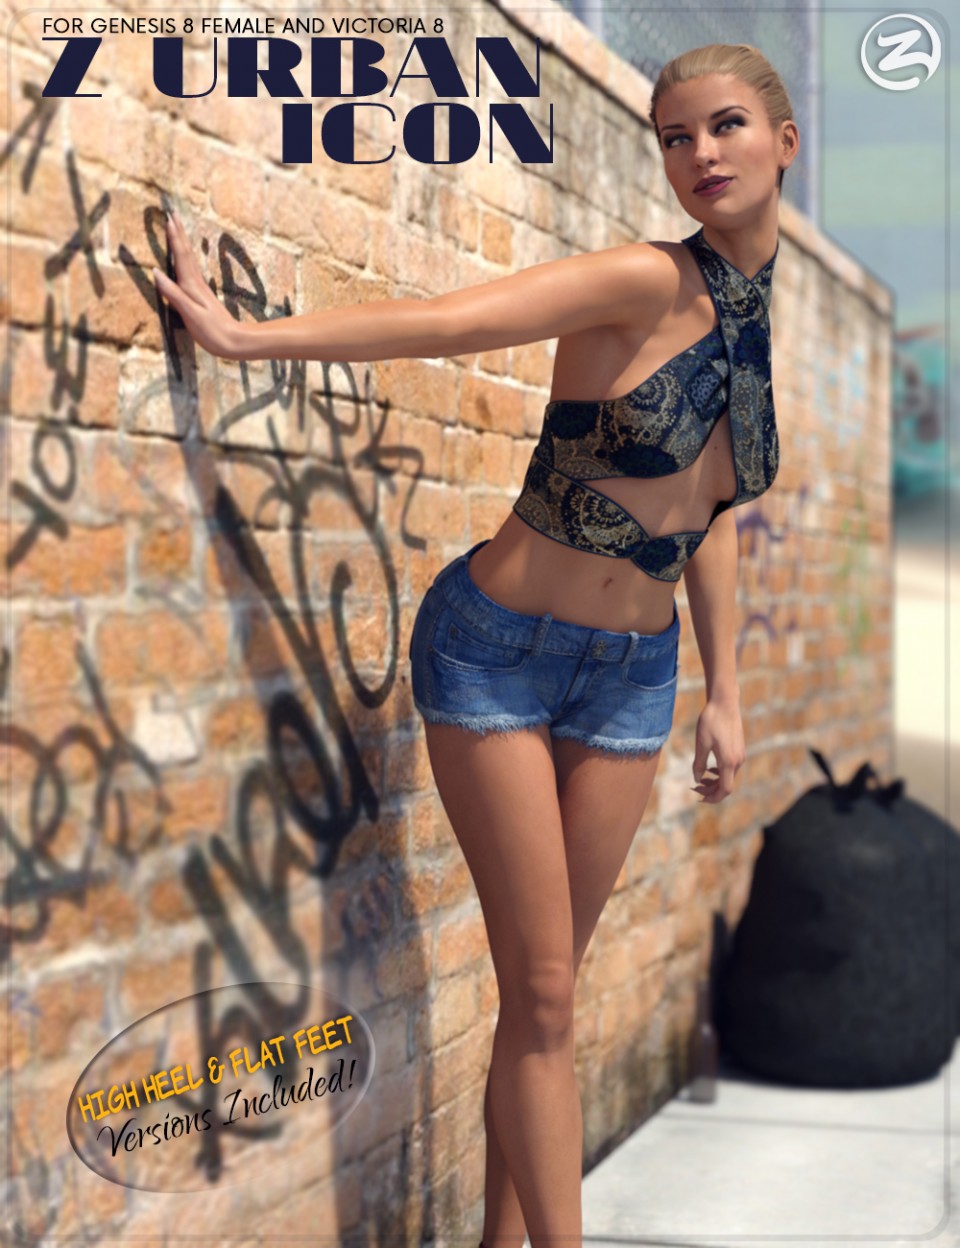 Z Urban Icon – Poses for Genesis 8 Female and Victoria 8_DAZ3DDL